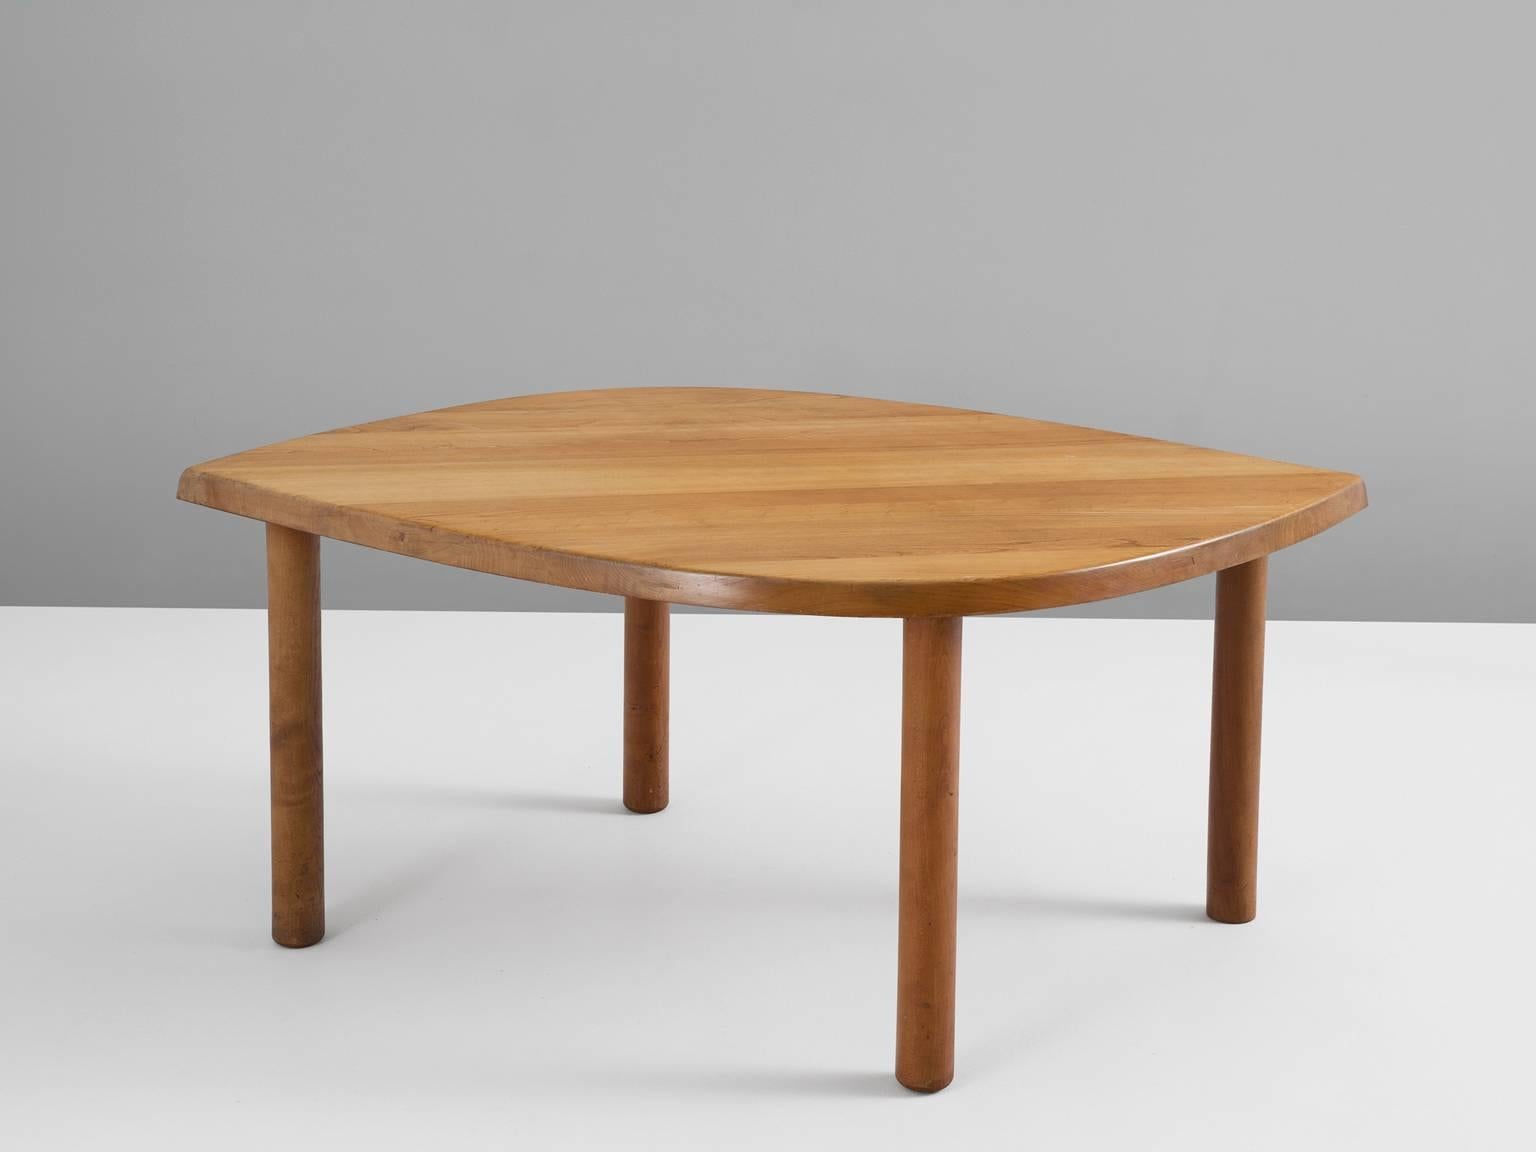 Table, in elm by Pierre Chapo, France, 1960s.

Rare high eye-table by French designer Pierre Chapo. This center table has a top in the shape of an eye or a leaf. Supported by four cylindrical legs of solid elm. Characteristic wood-joints are